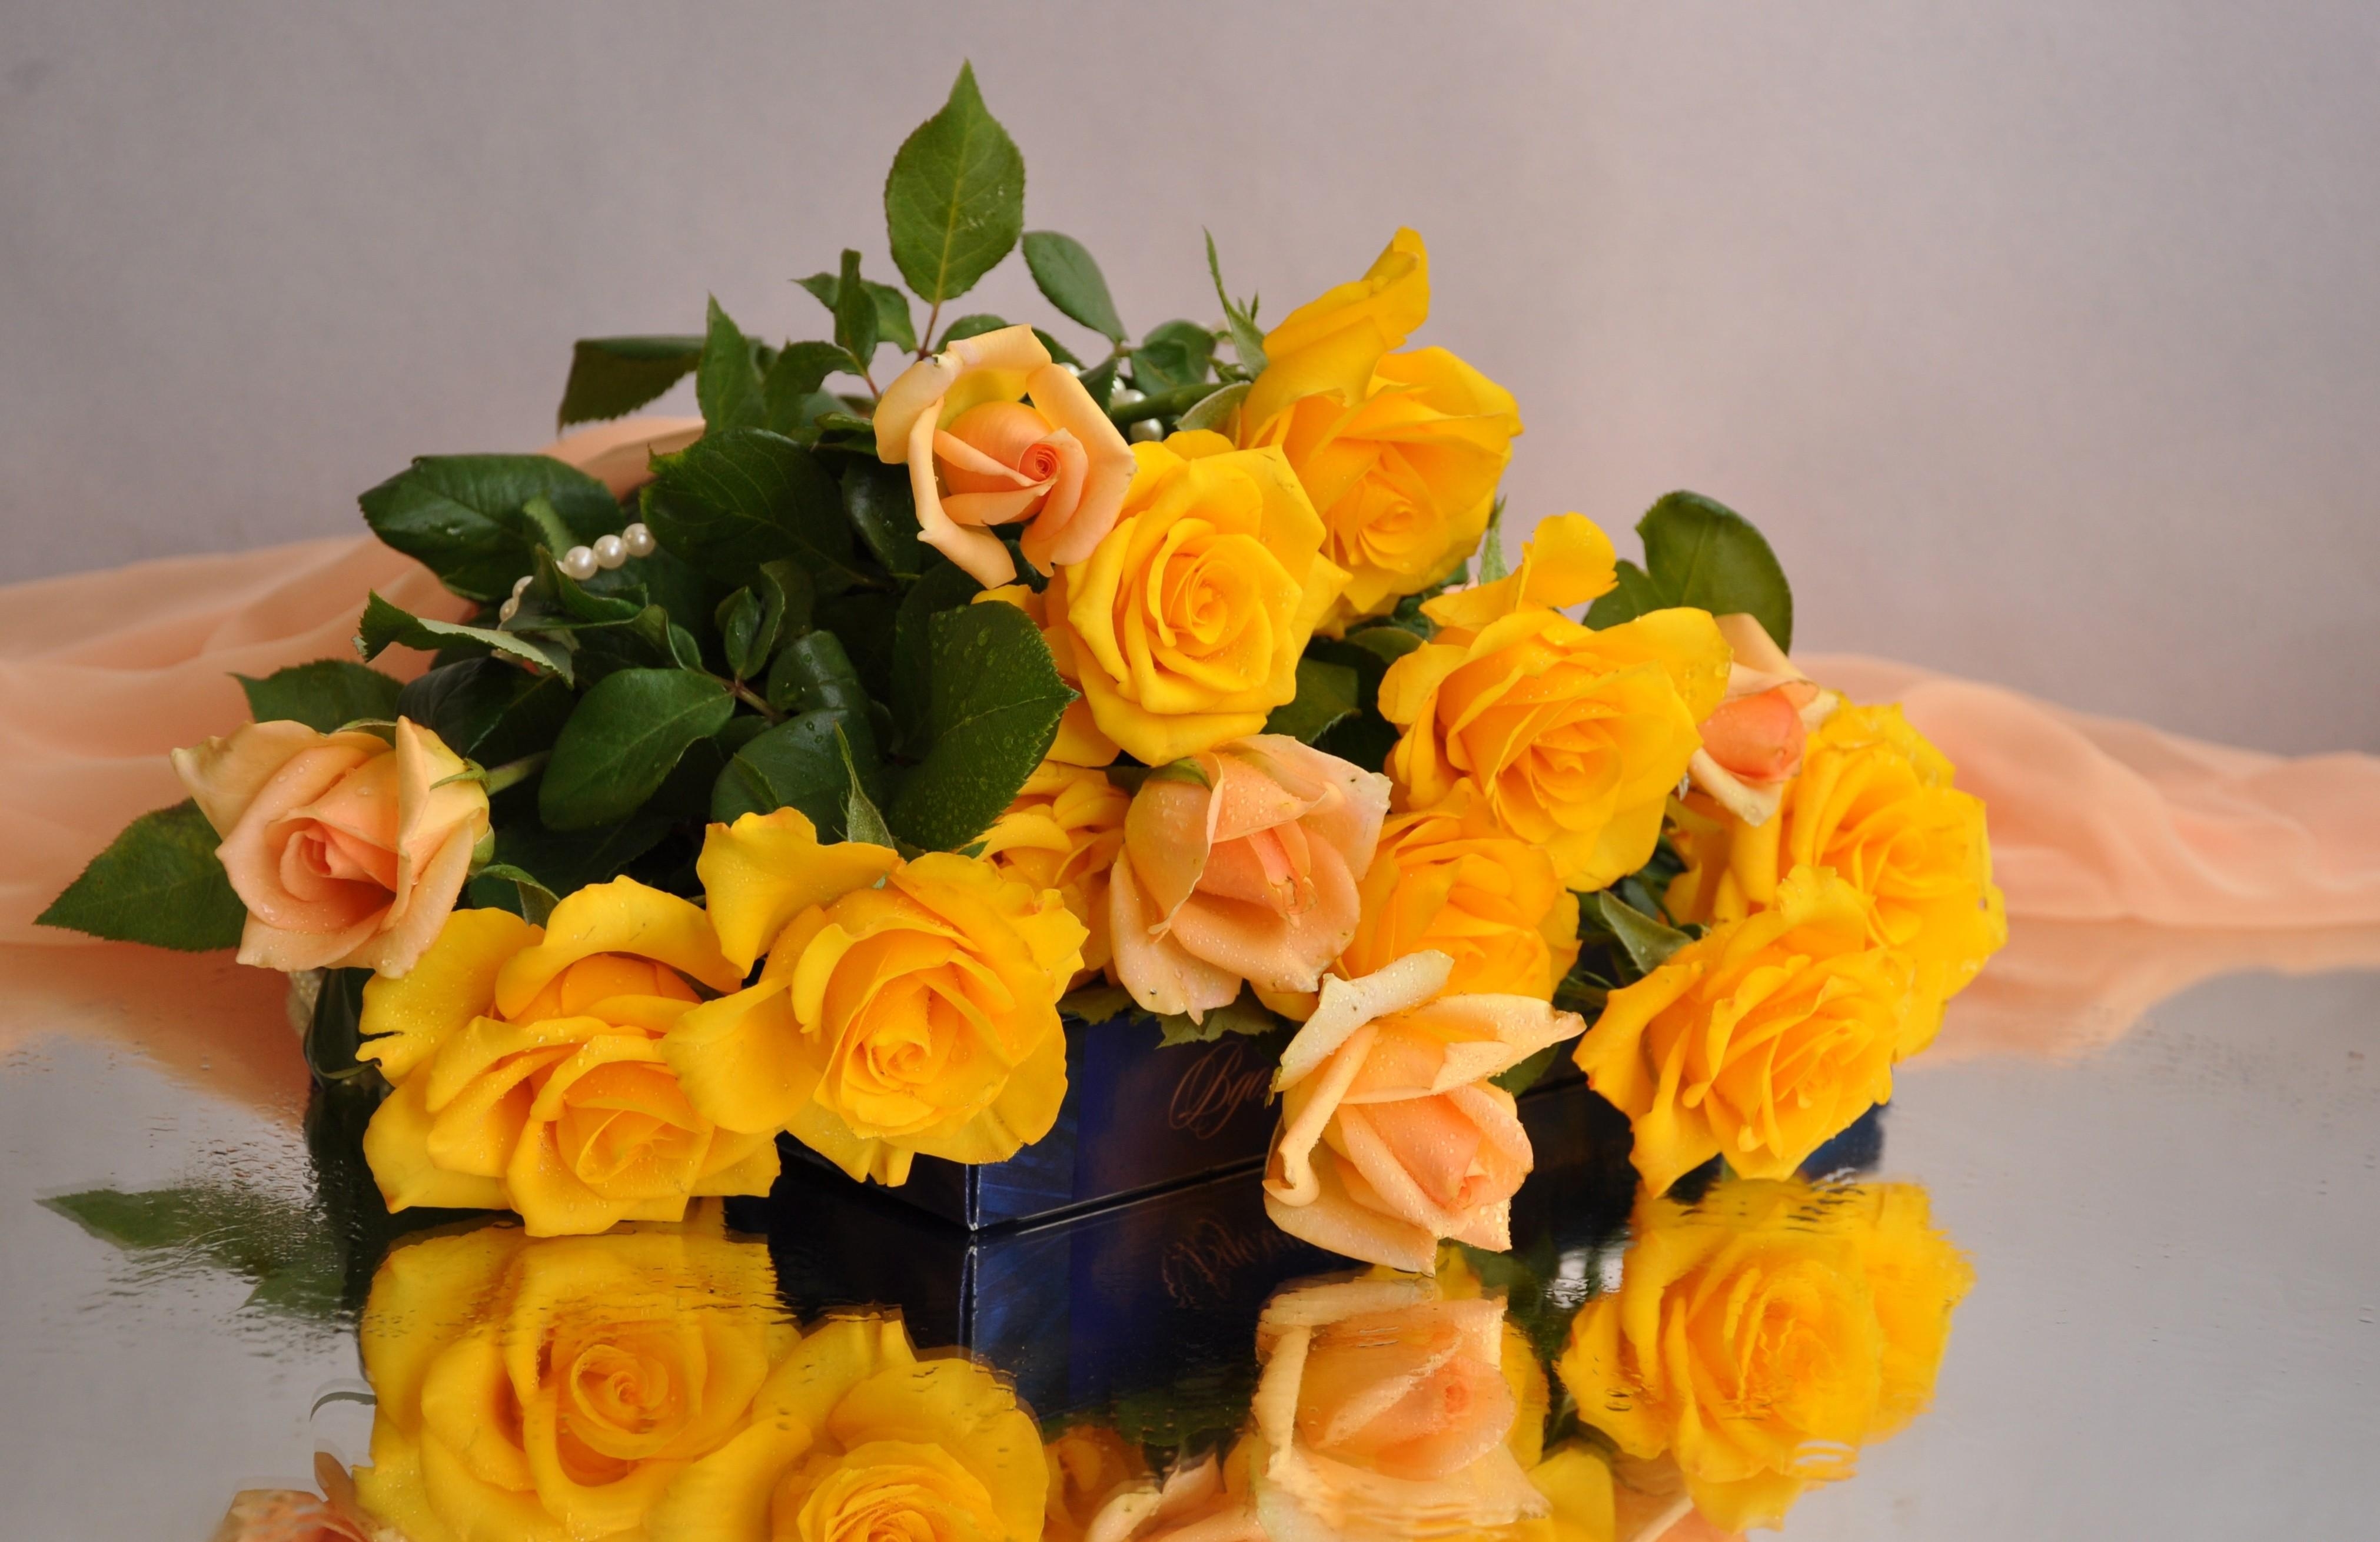 roses, flowers, candies, yellow, bouquet, cloth